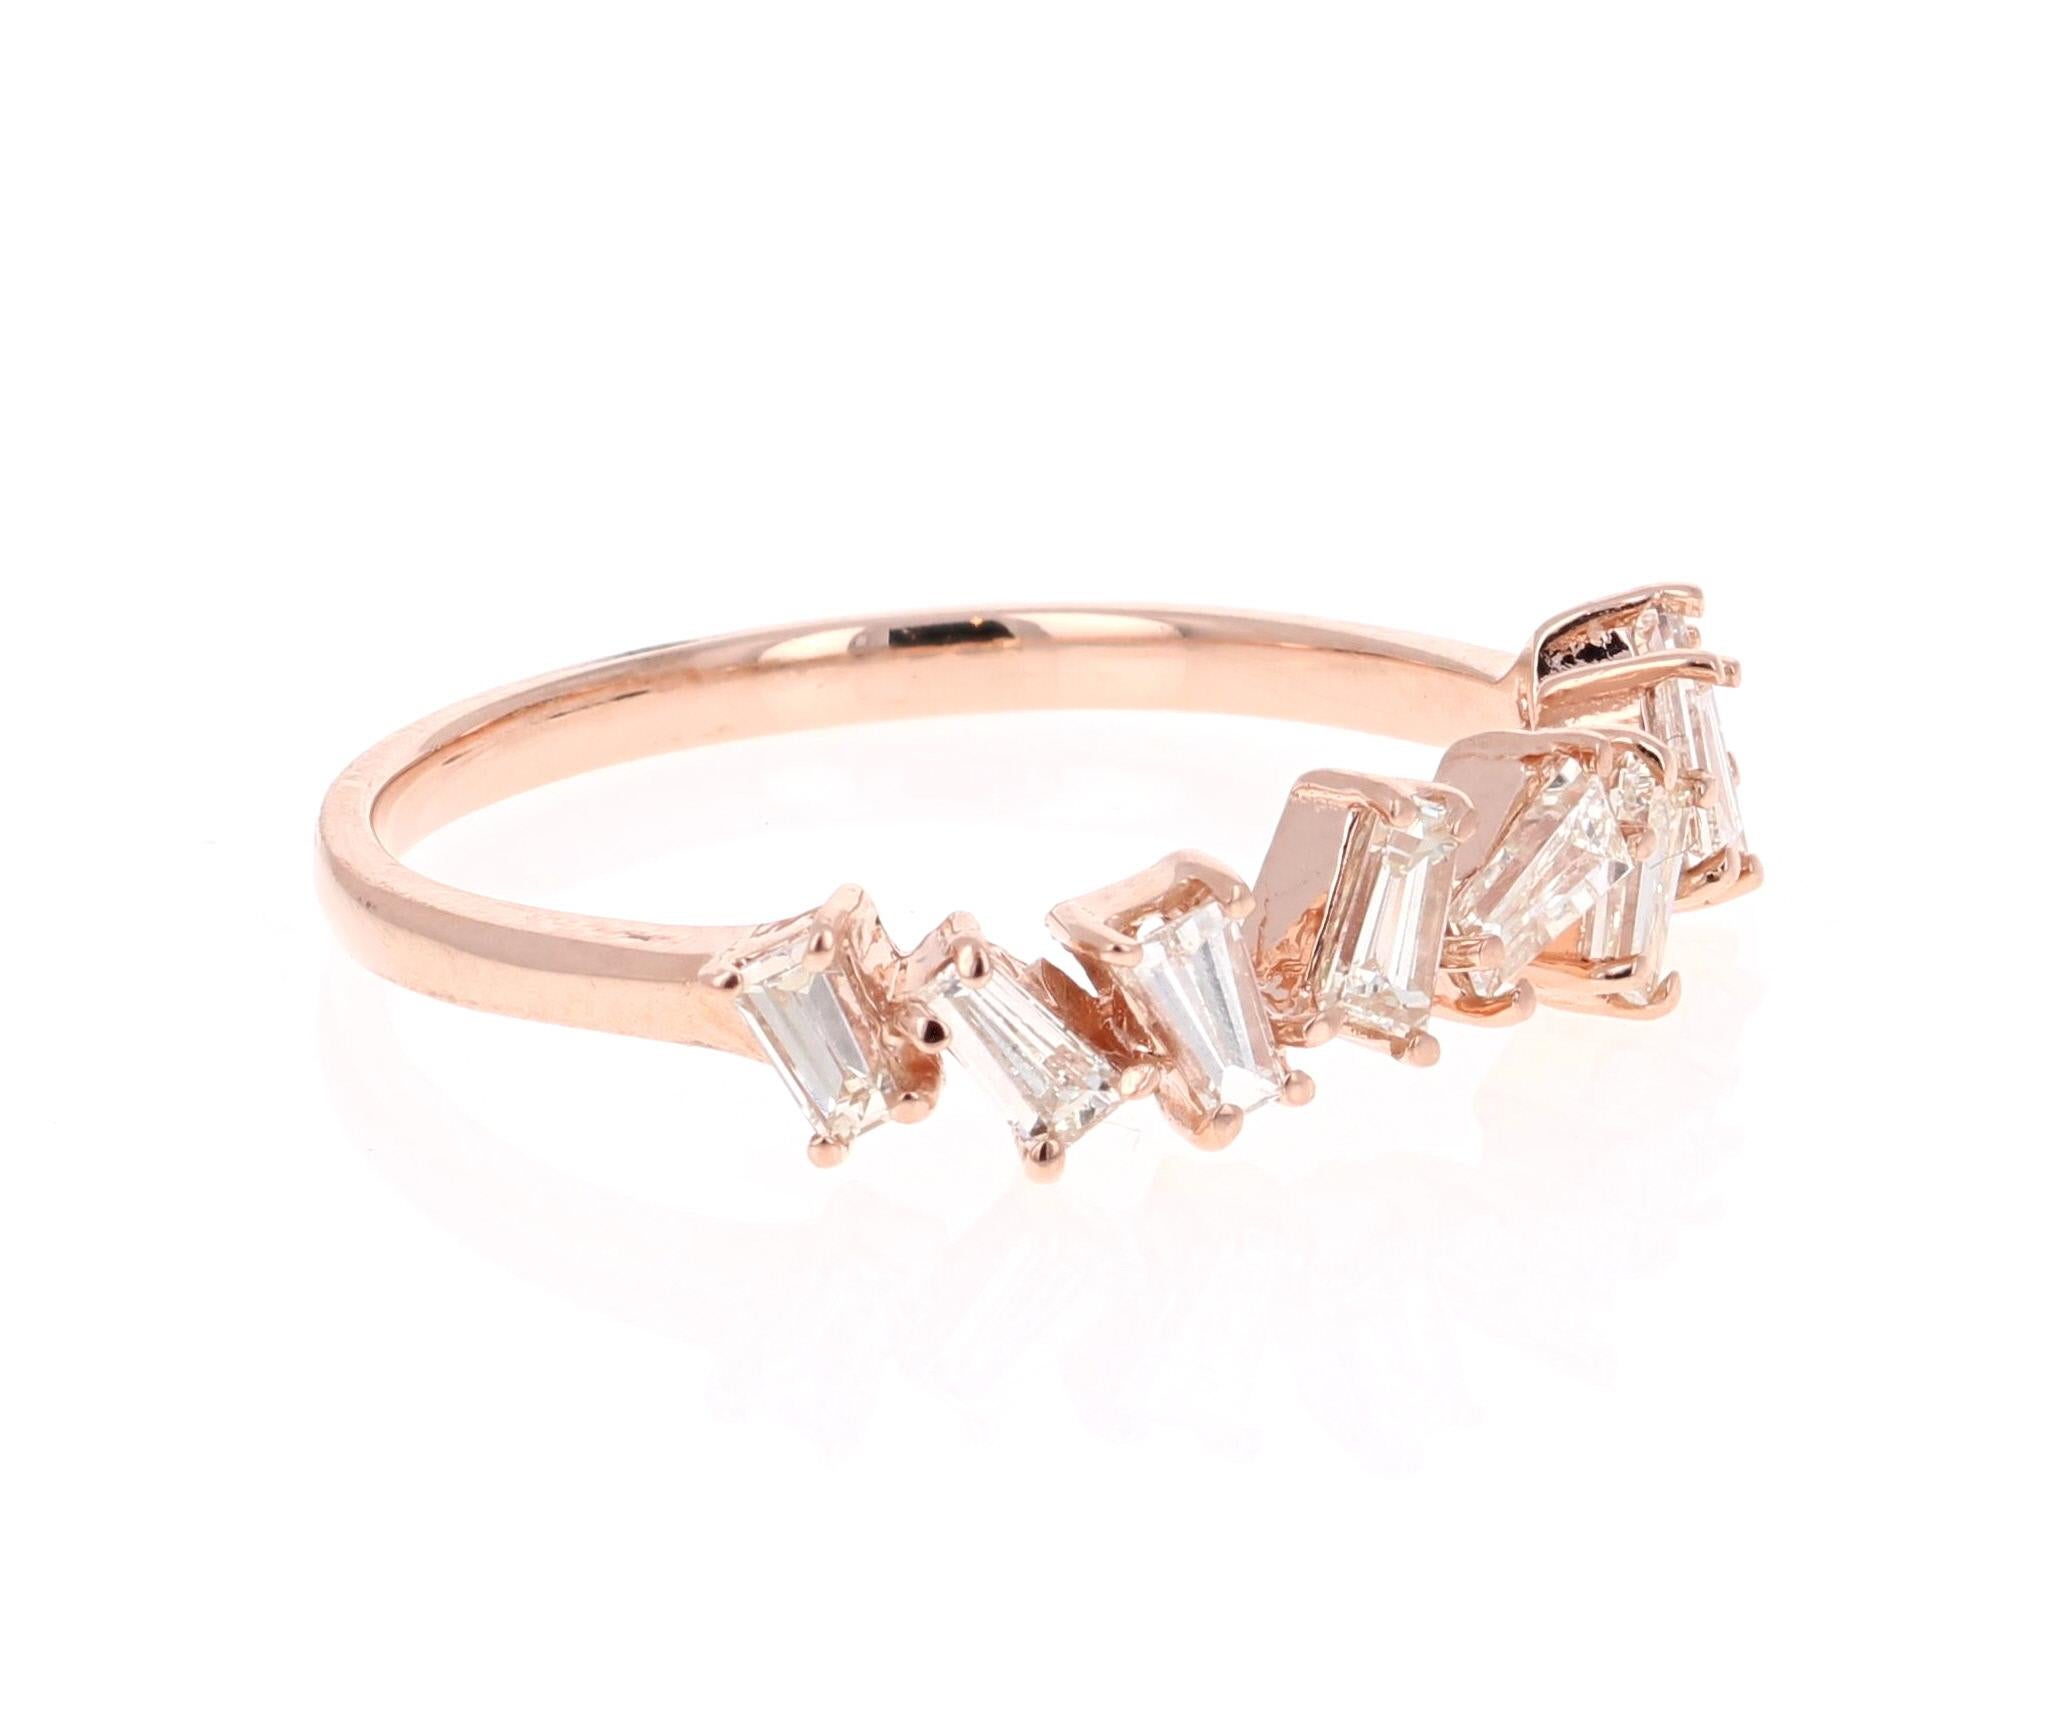 Unique and cute band that can be worn as a single band or stack with other bands in other colors of Gold! 

This ring has 12 Baguette Cut Diamonds that weigh 0.55 Carats. The clarity and color of the diamonds is VS-H.

Crafted in 14 Karat Rose Gold